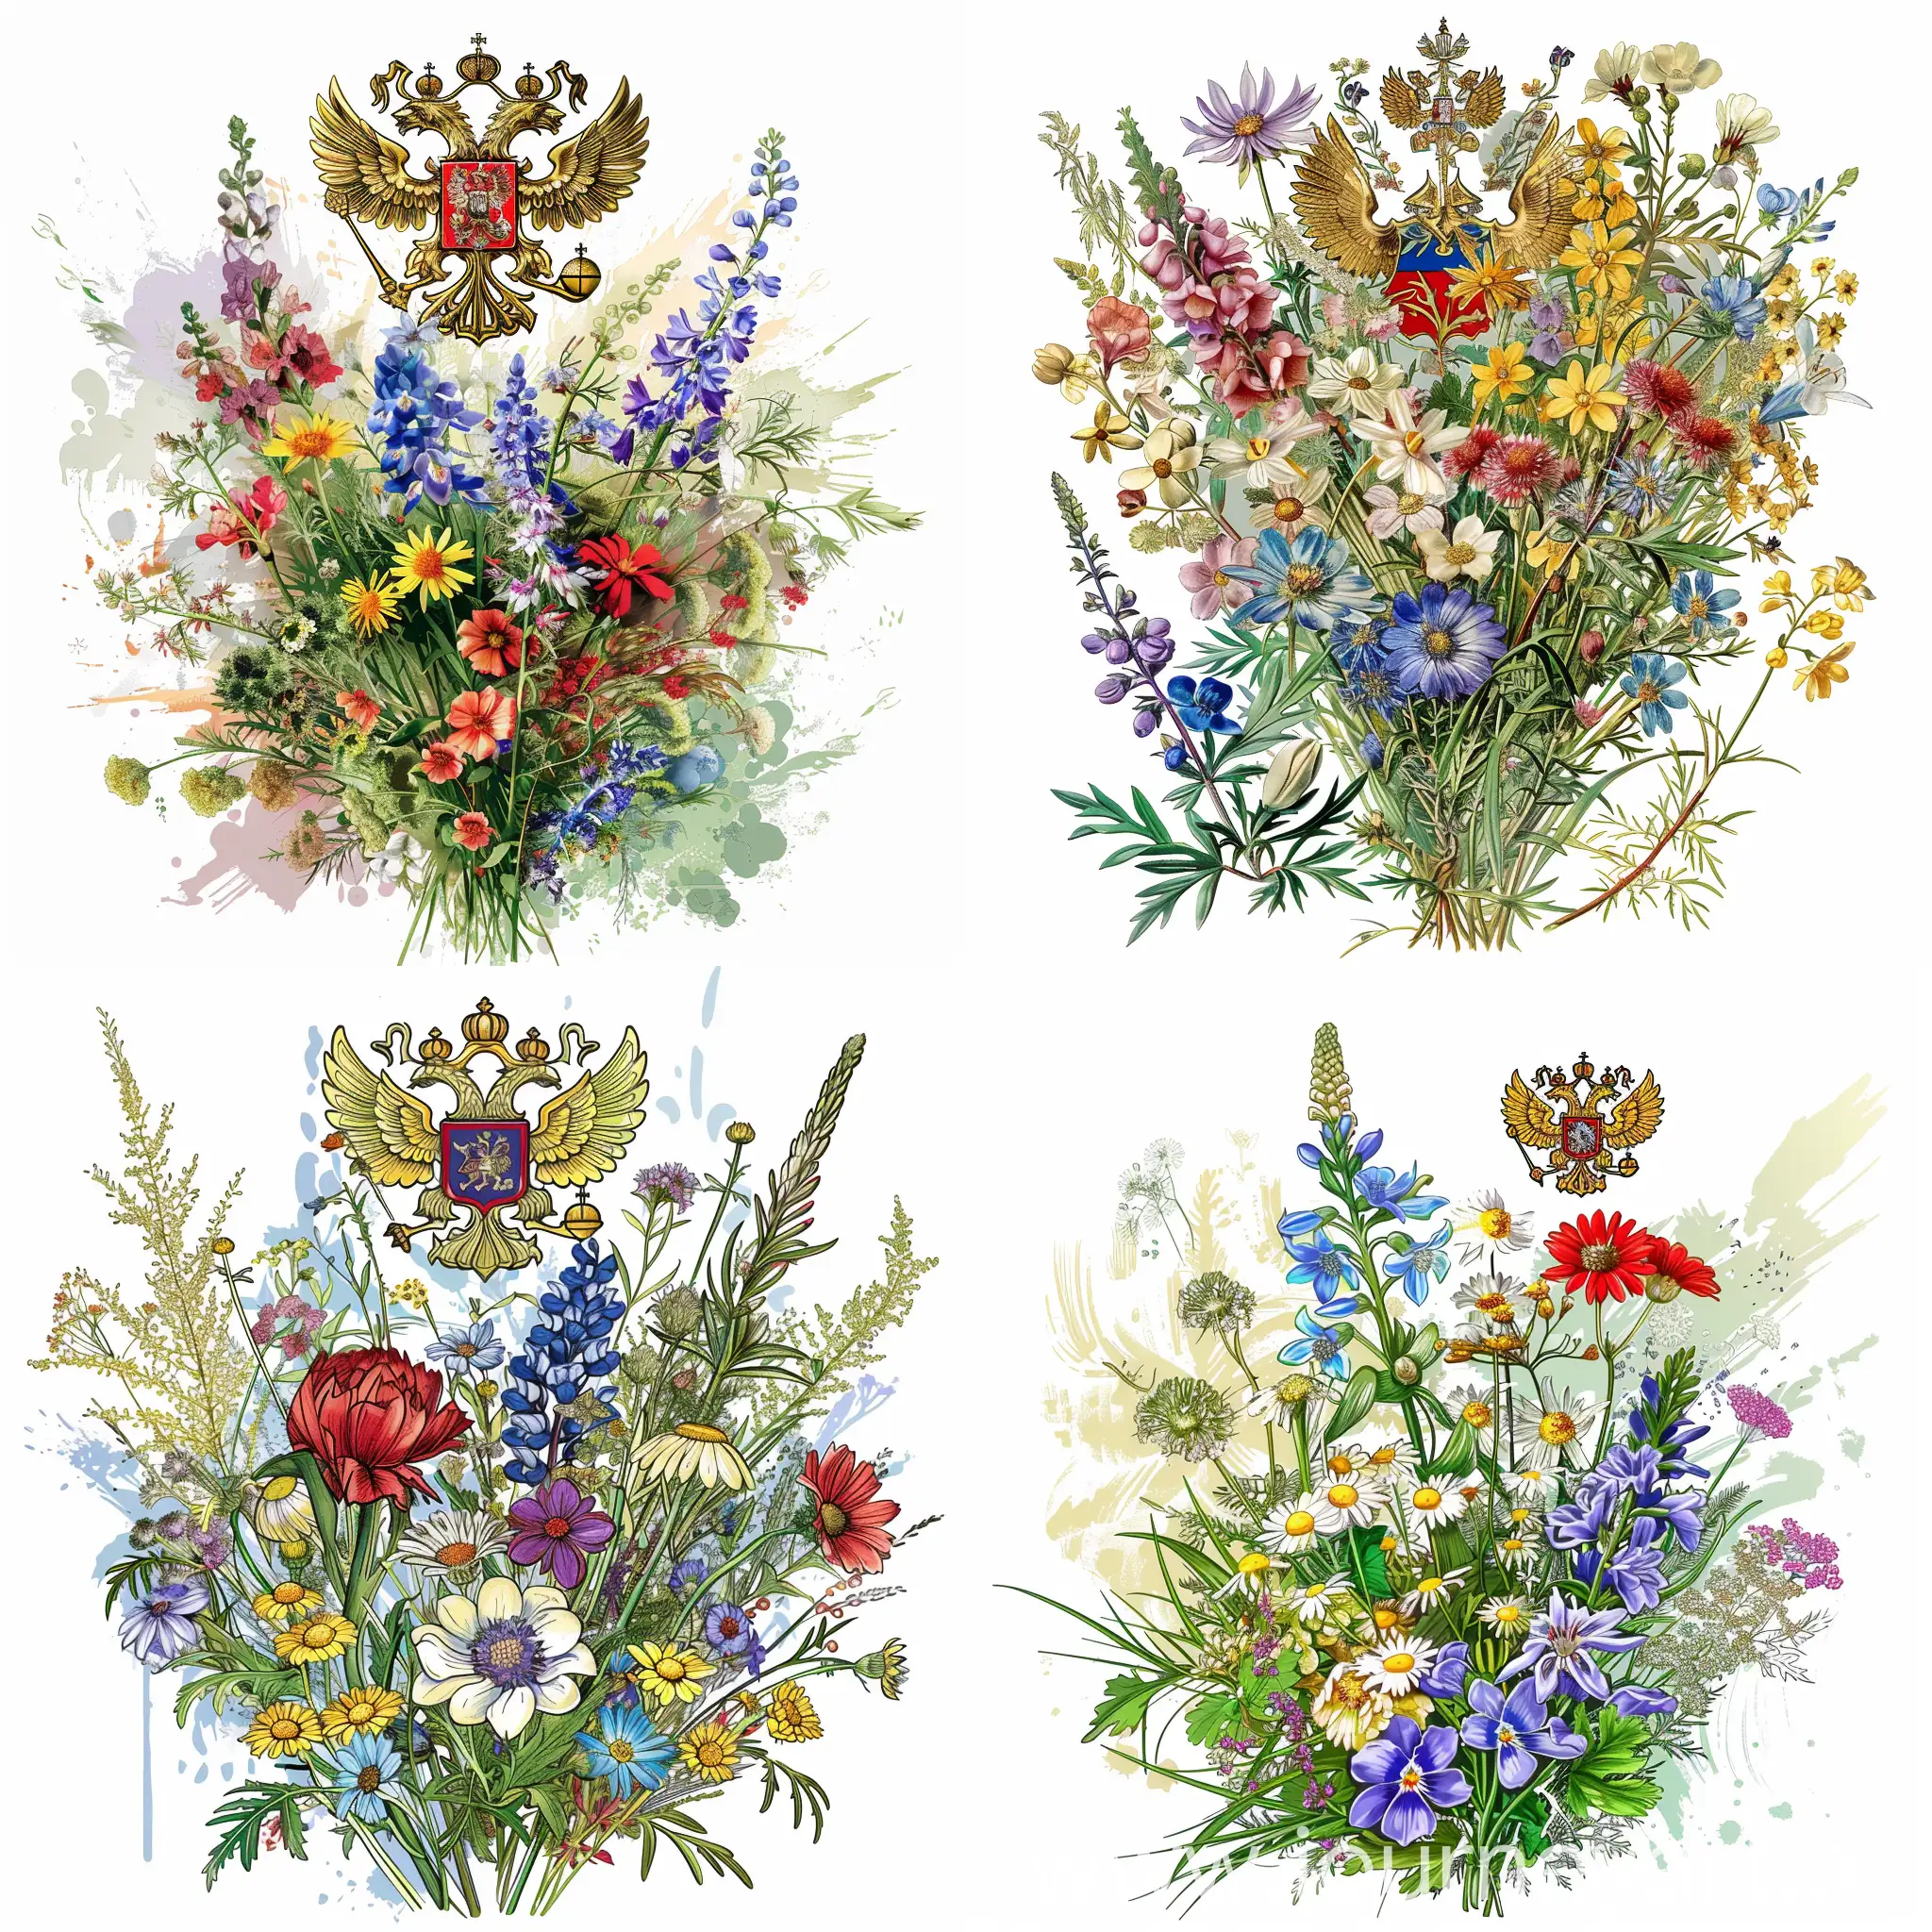 Wildflower-Bouquet-with-Russian-Coat-of-Arms-Background